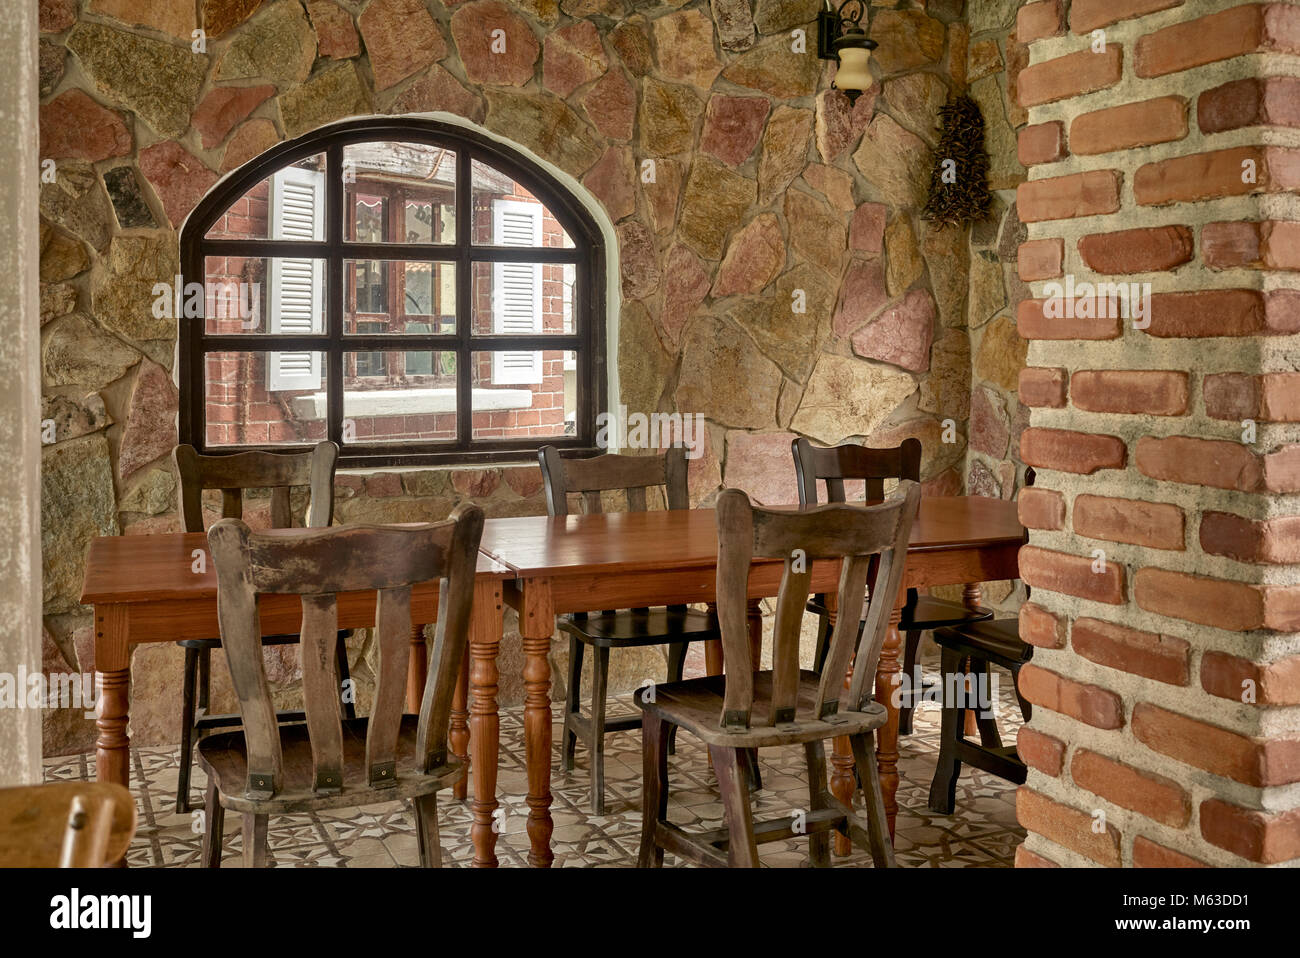 Rustic stone built restaurant interior with wooden tables and chairs. Vintage restaurant interior with cosy corner dining. Stock Photo